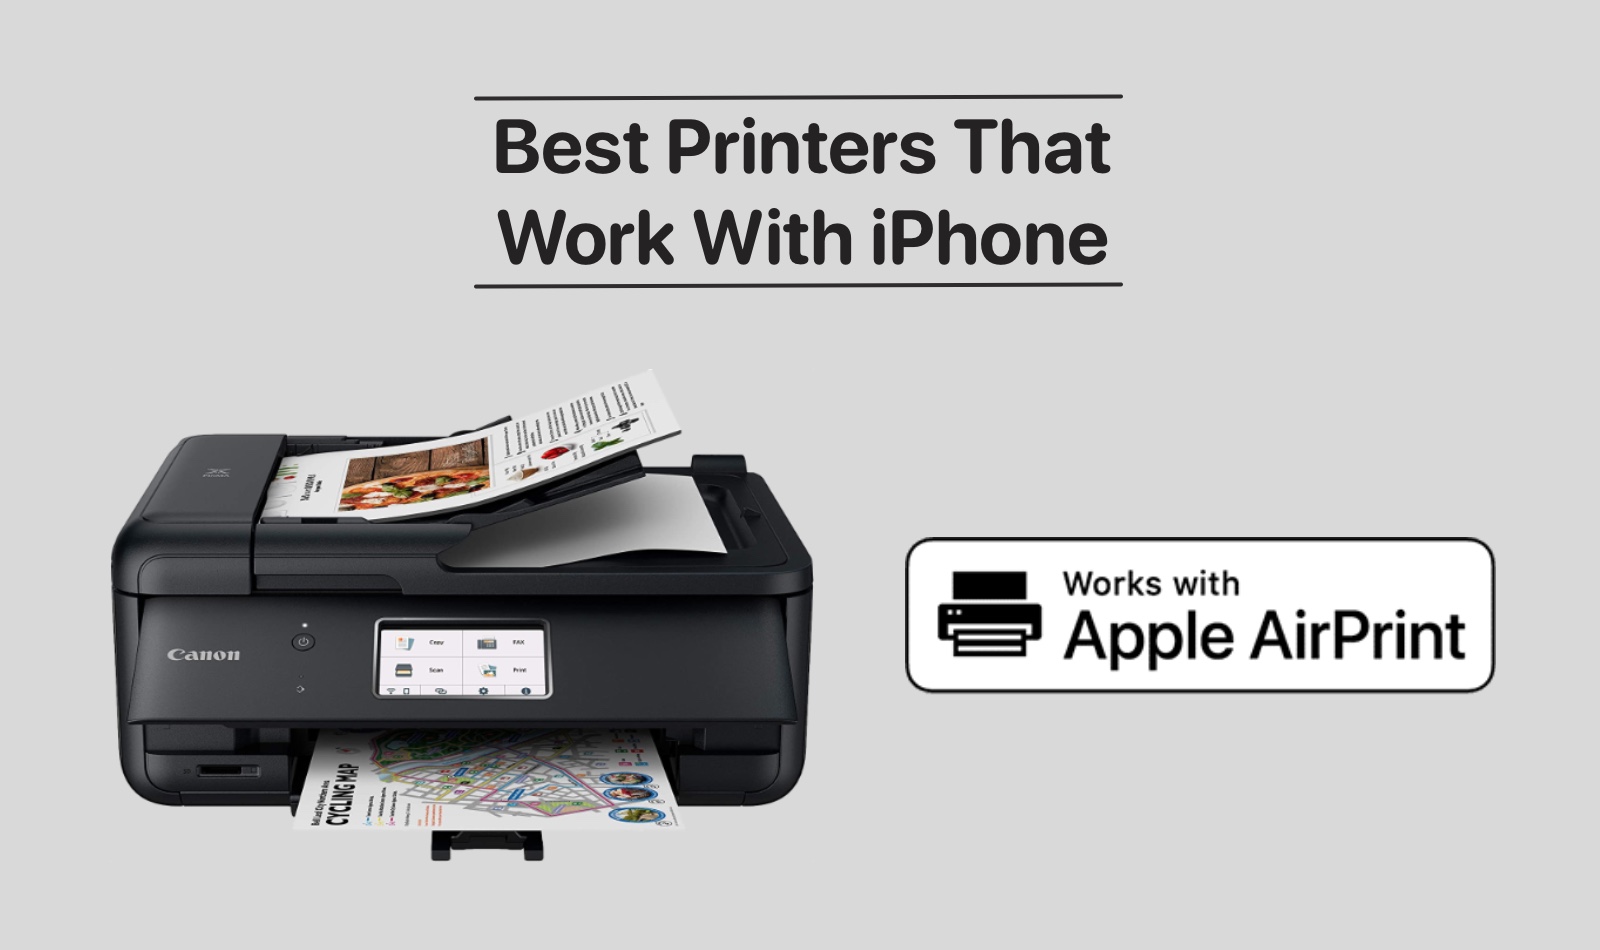 Best AirPrint Enabled Printers Can With Or iPad - iOS Hacker